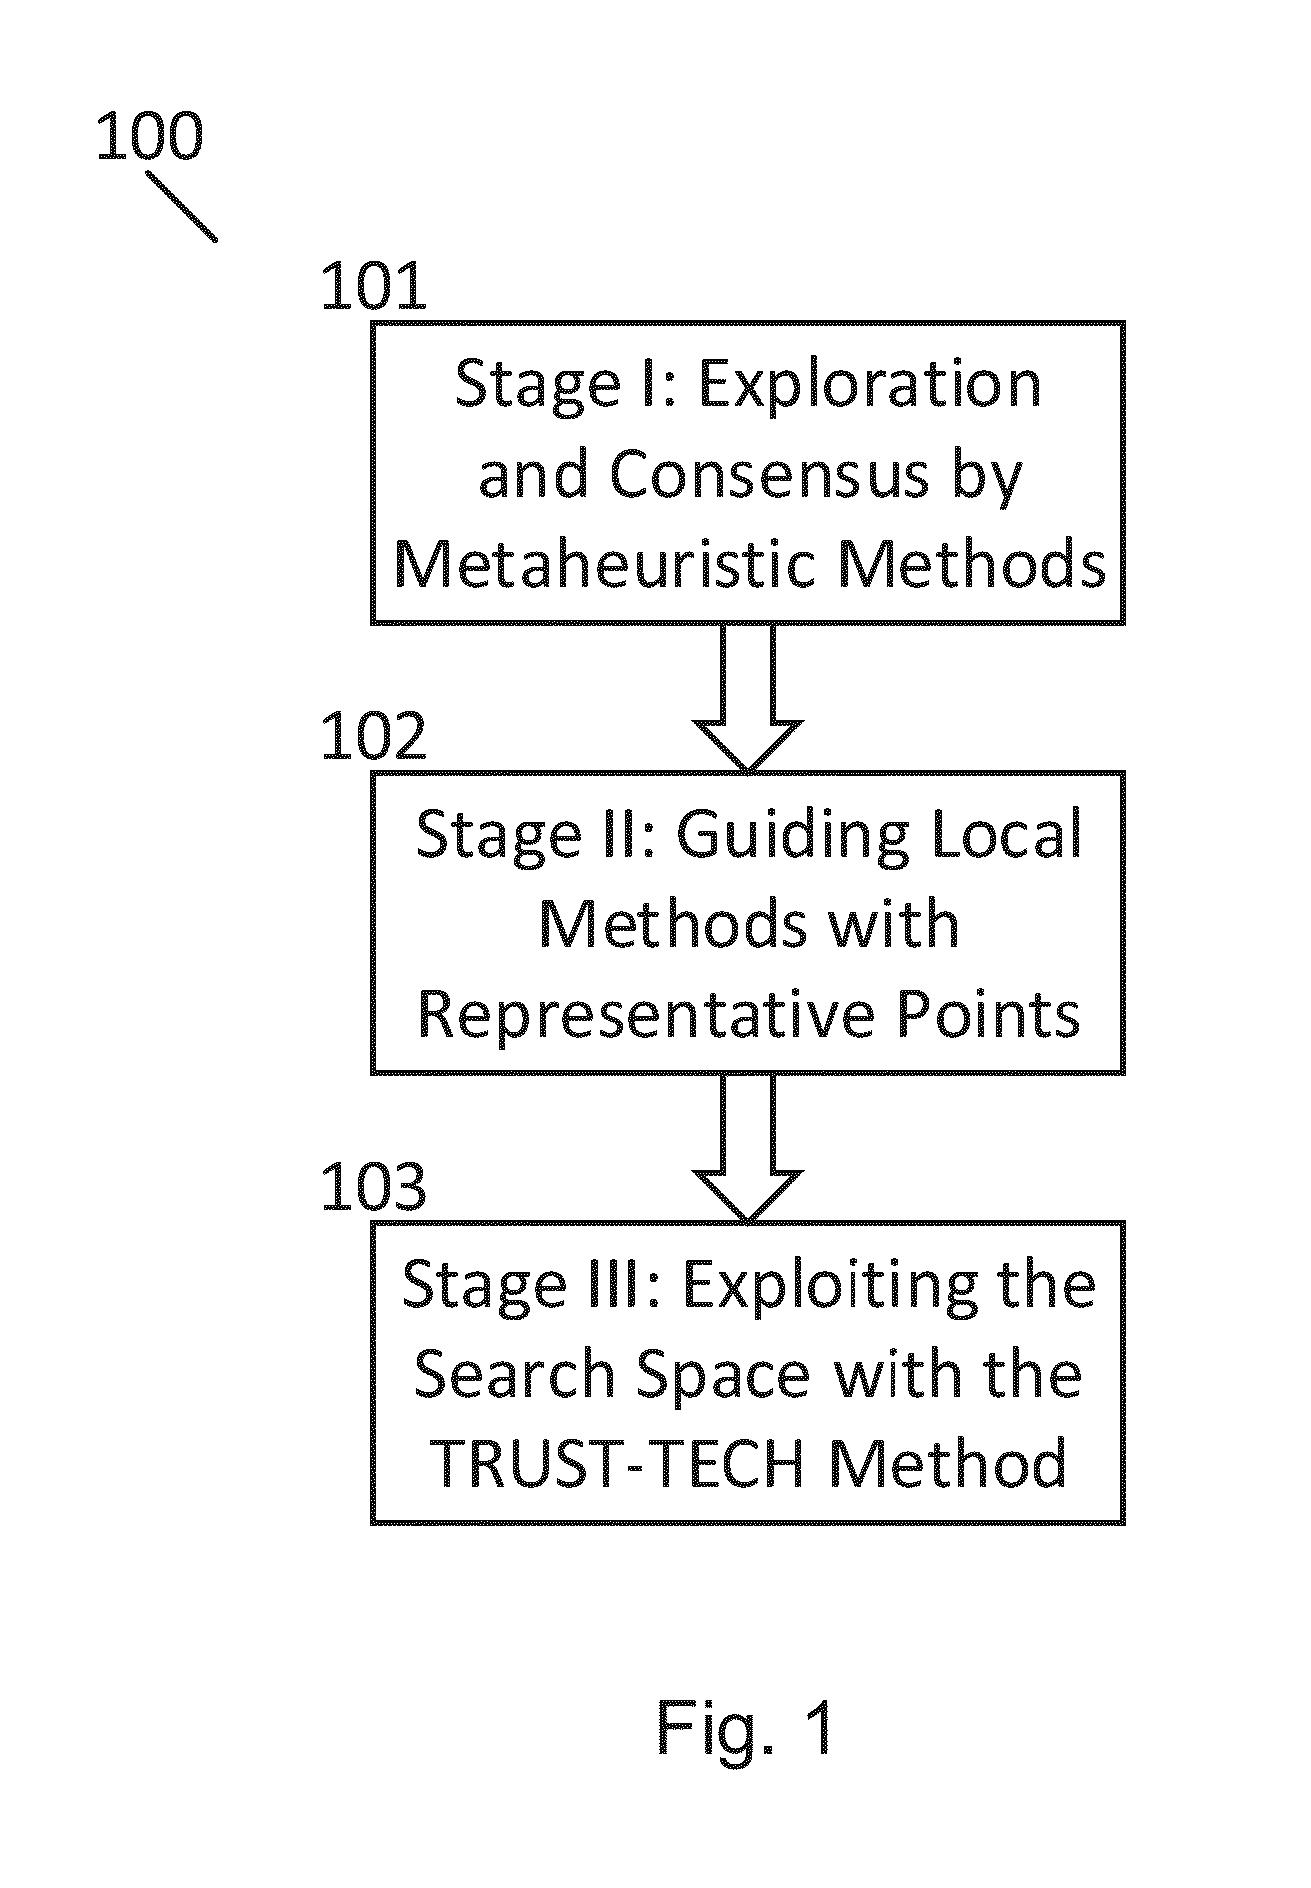 Metaheuristic-guided trust-tech methods for global unconstrained optimization